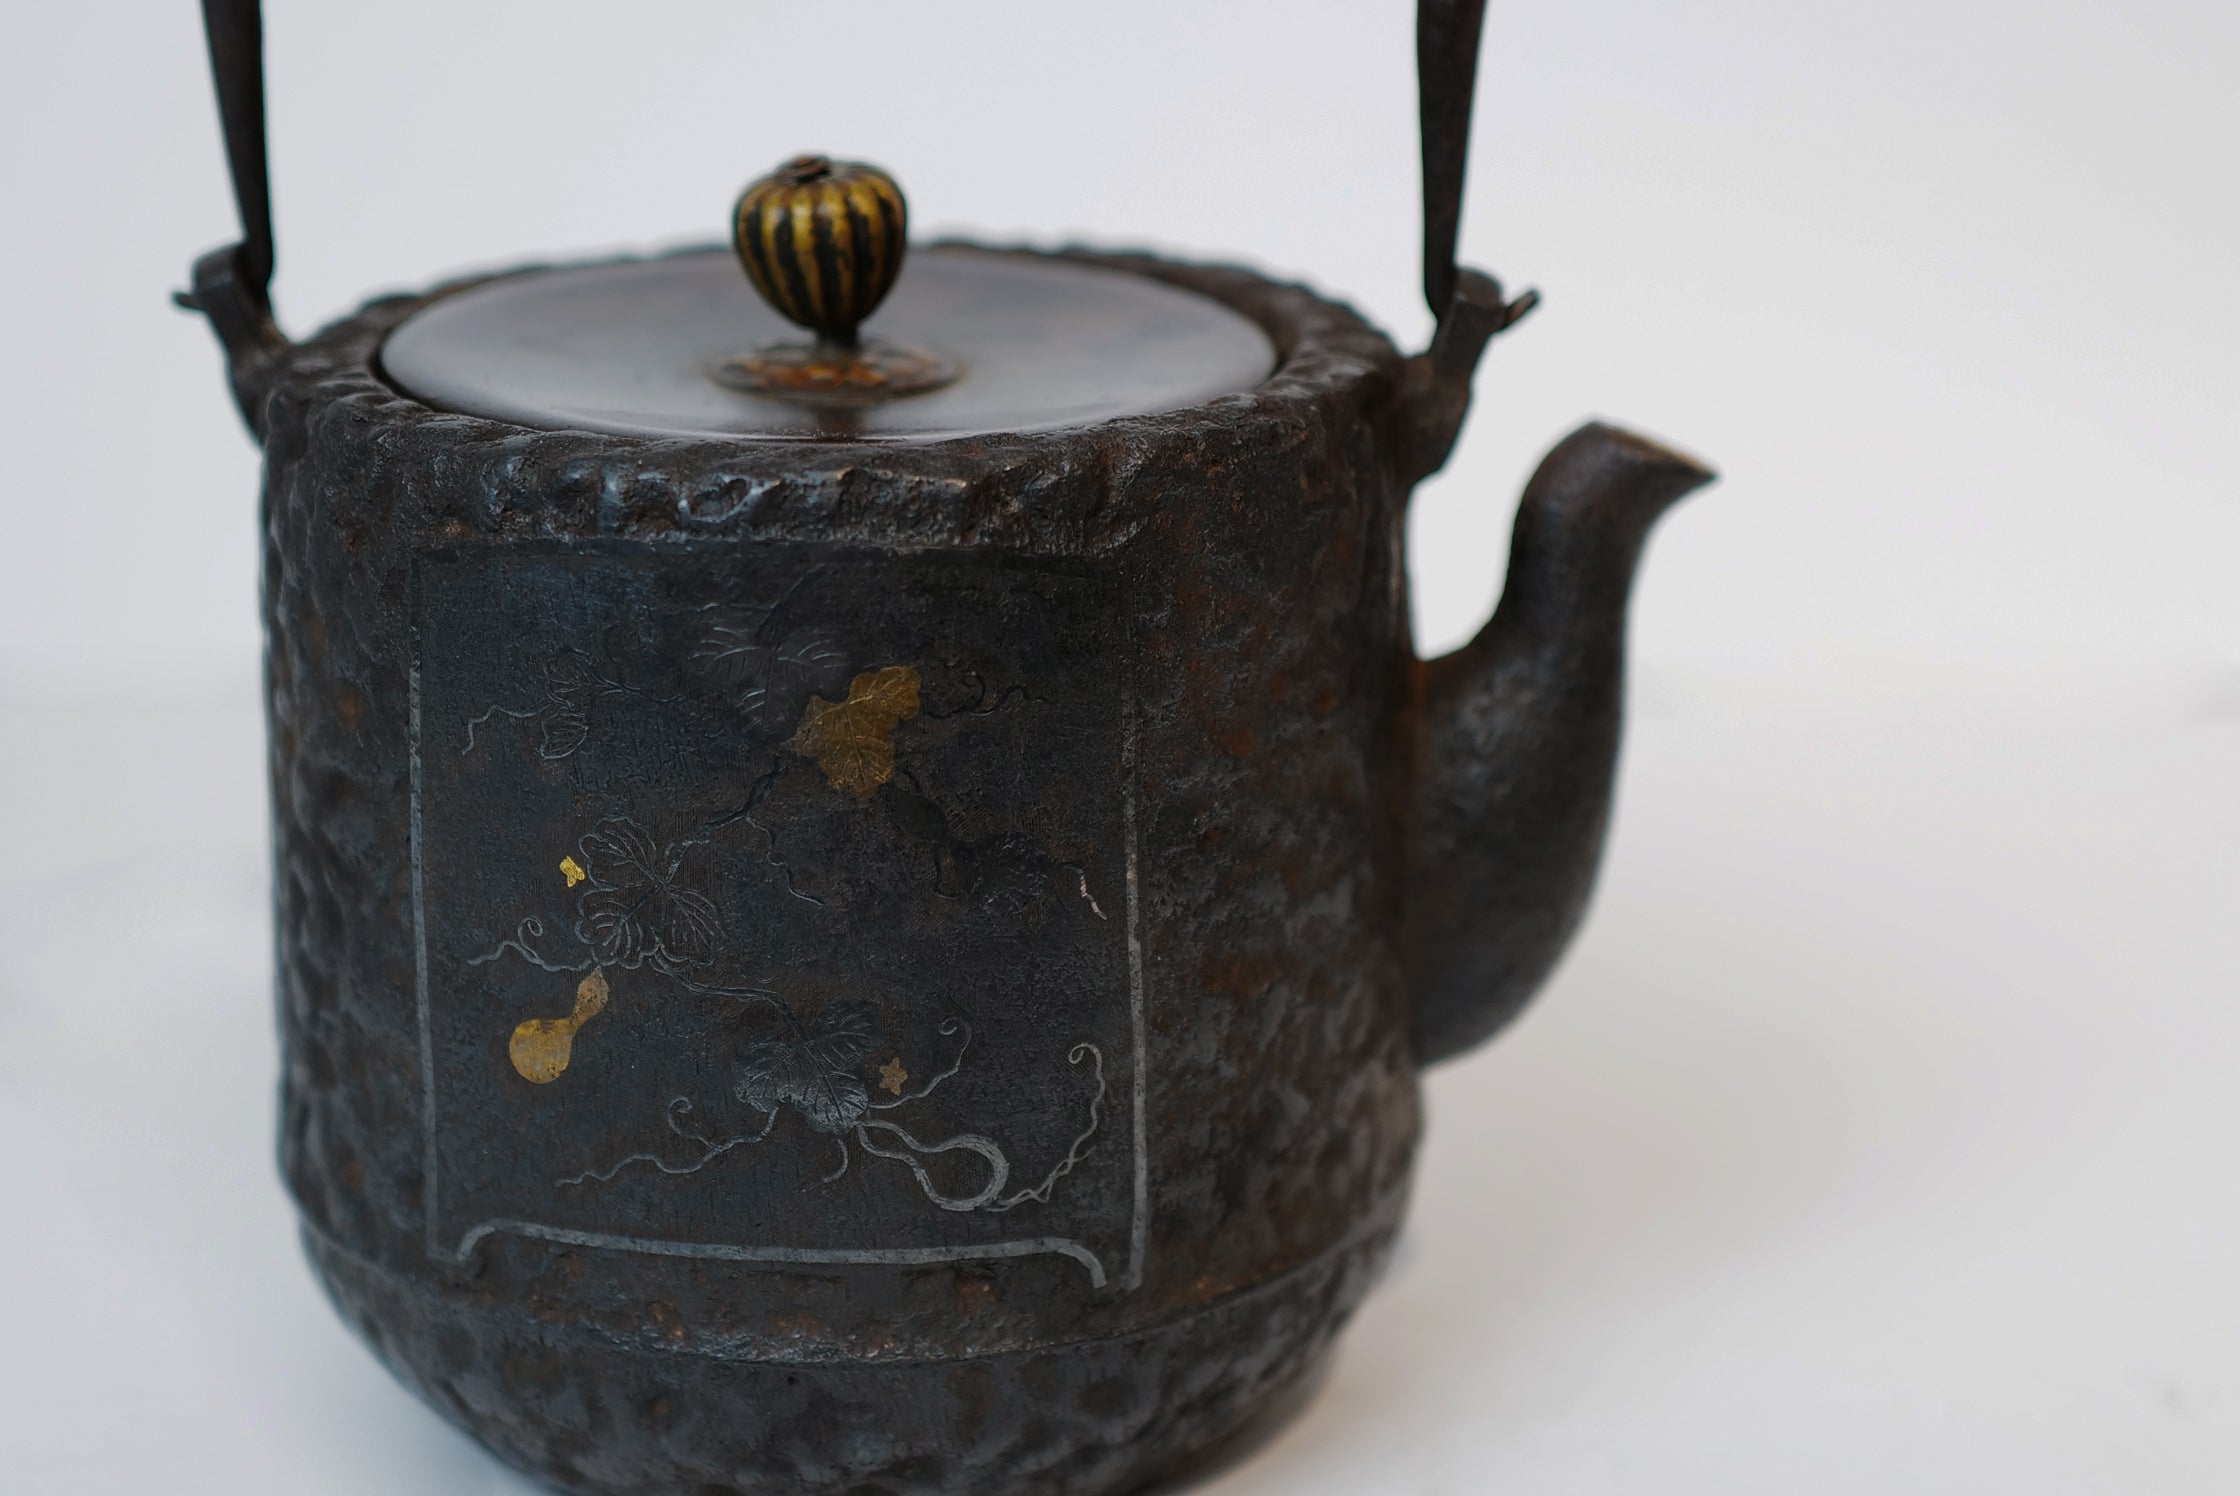 Iron Kettle Pot with Gold and Silver Inlaid Patterns 【精金堂 · 嵌金银葫芦纹】